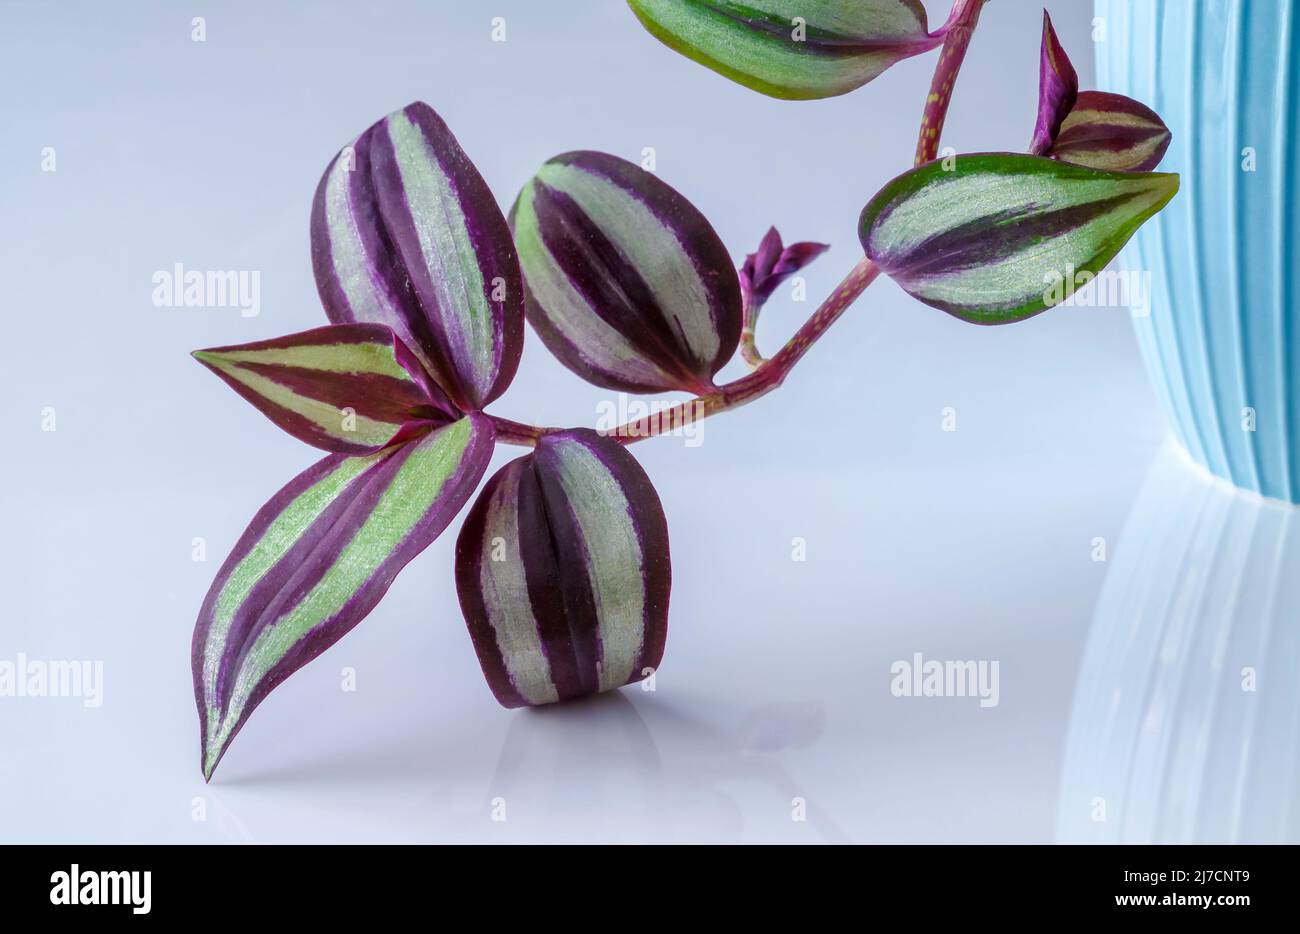 Ternary, Tradescantia L., colorful leaves in a blue cup on a soft blurred background, graft of a young plant Stock Photo